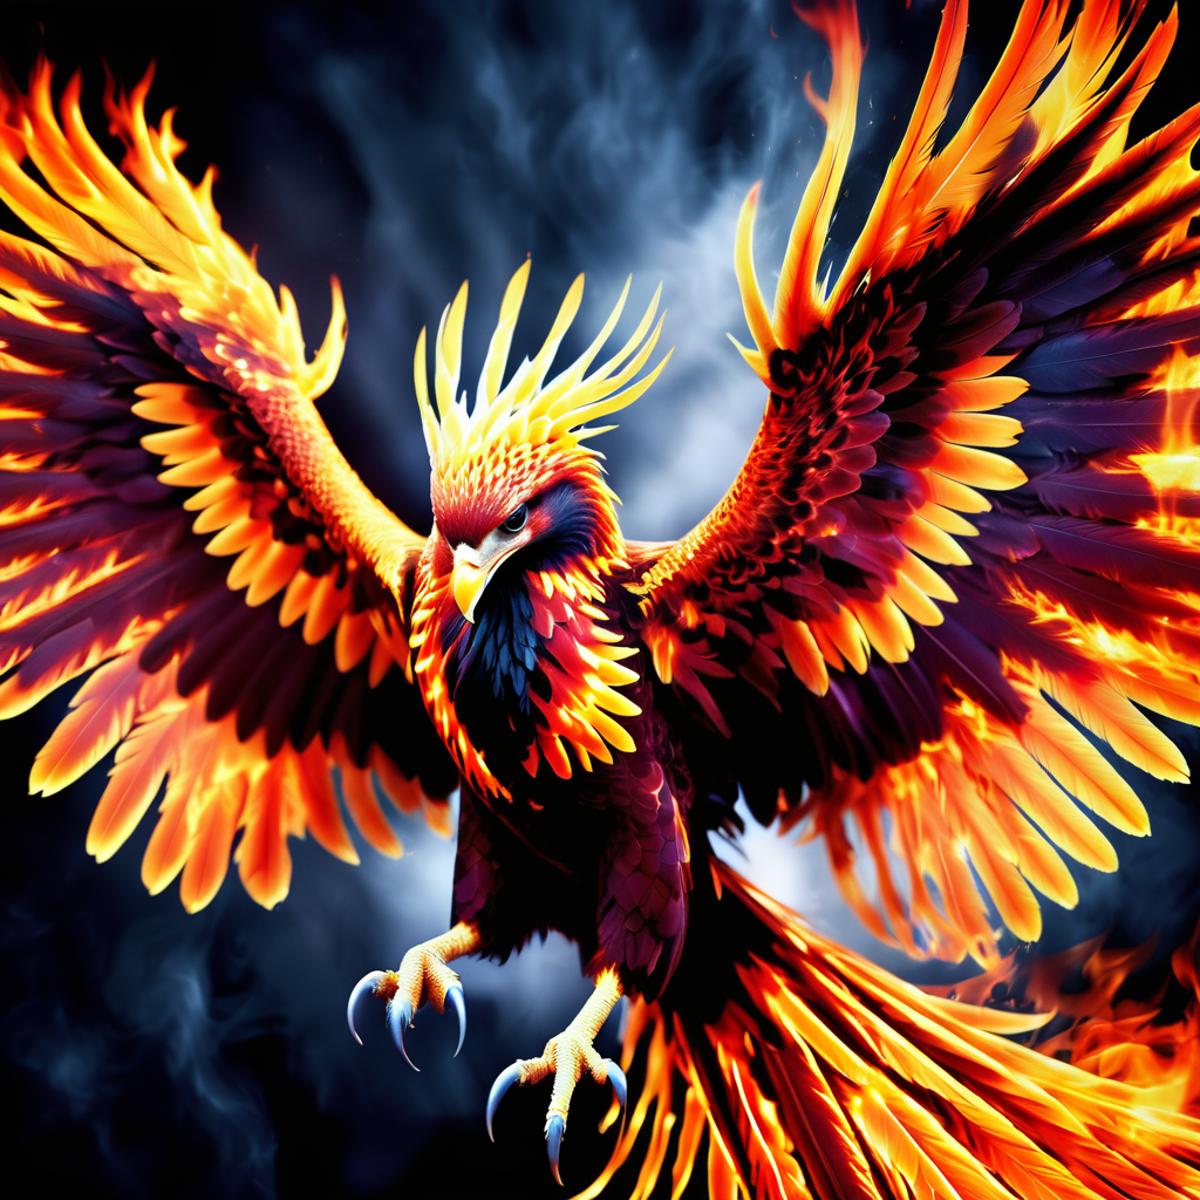 Phoenix image by TrafficMeany